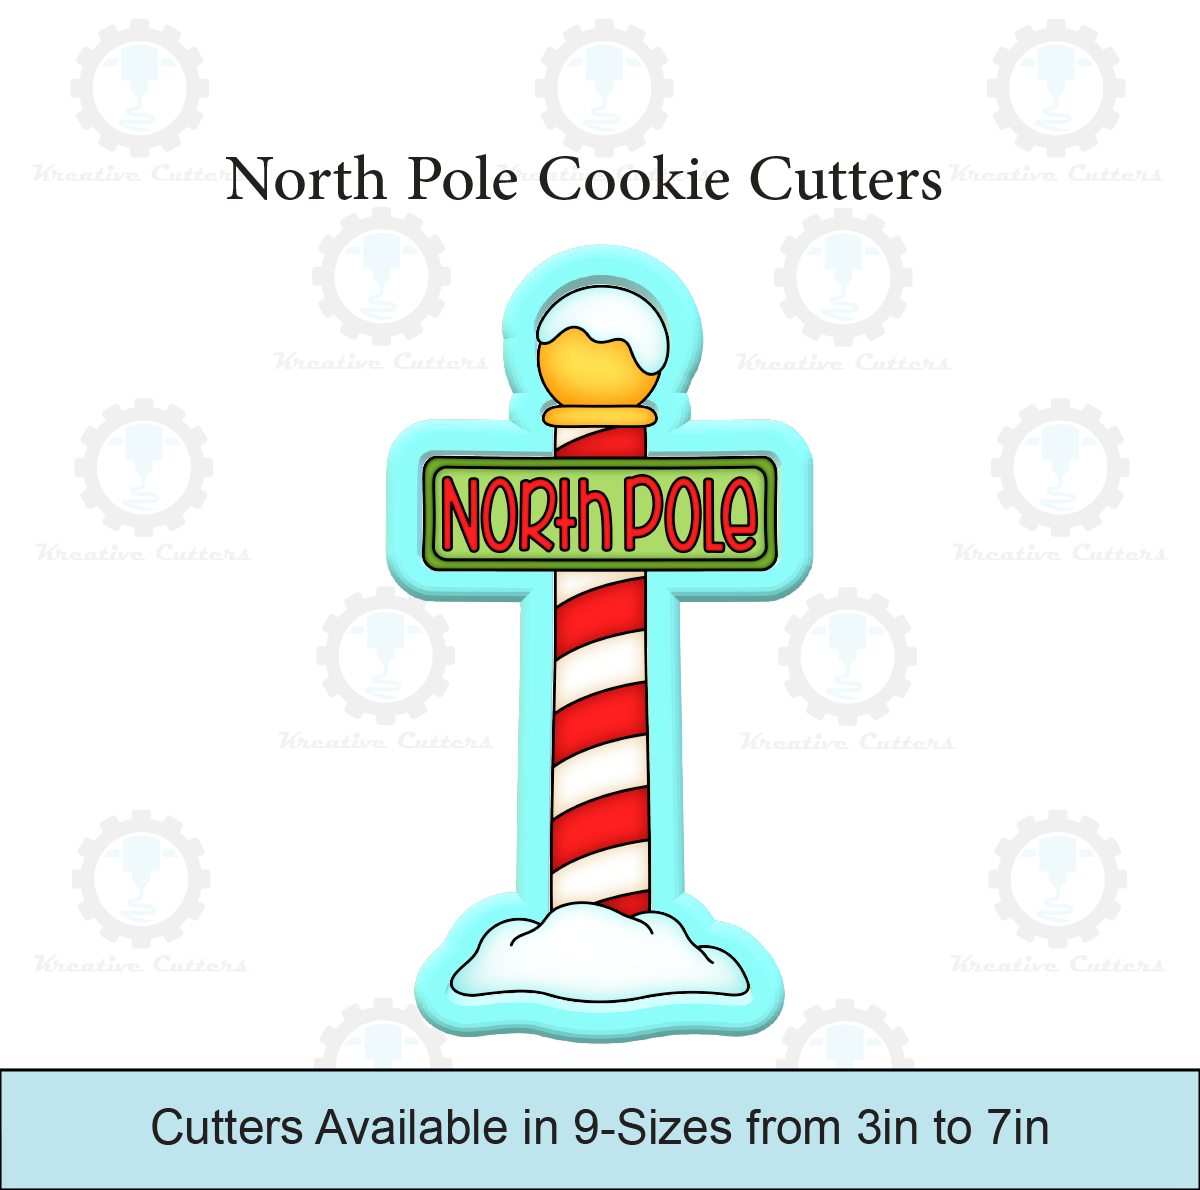 North Pole Cookie Cutters